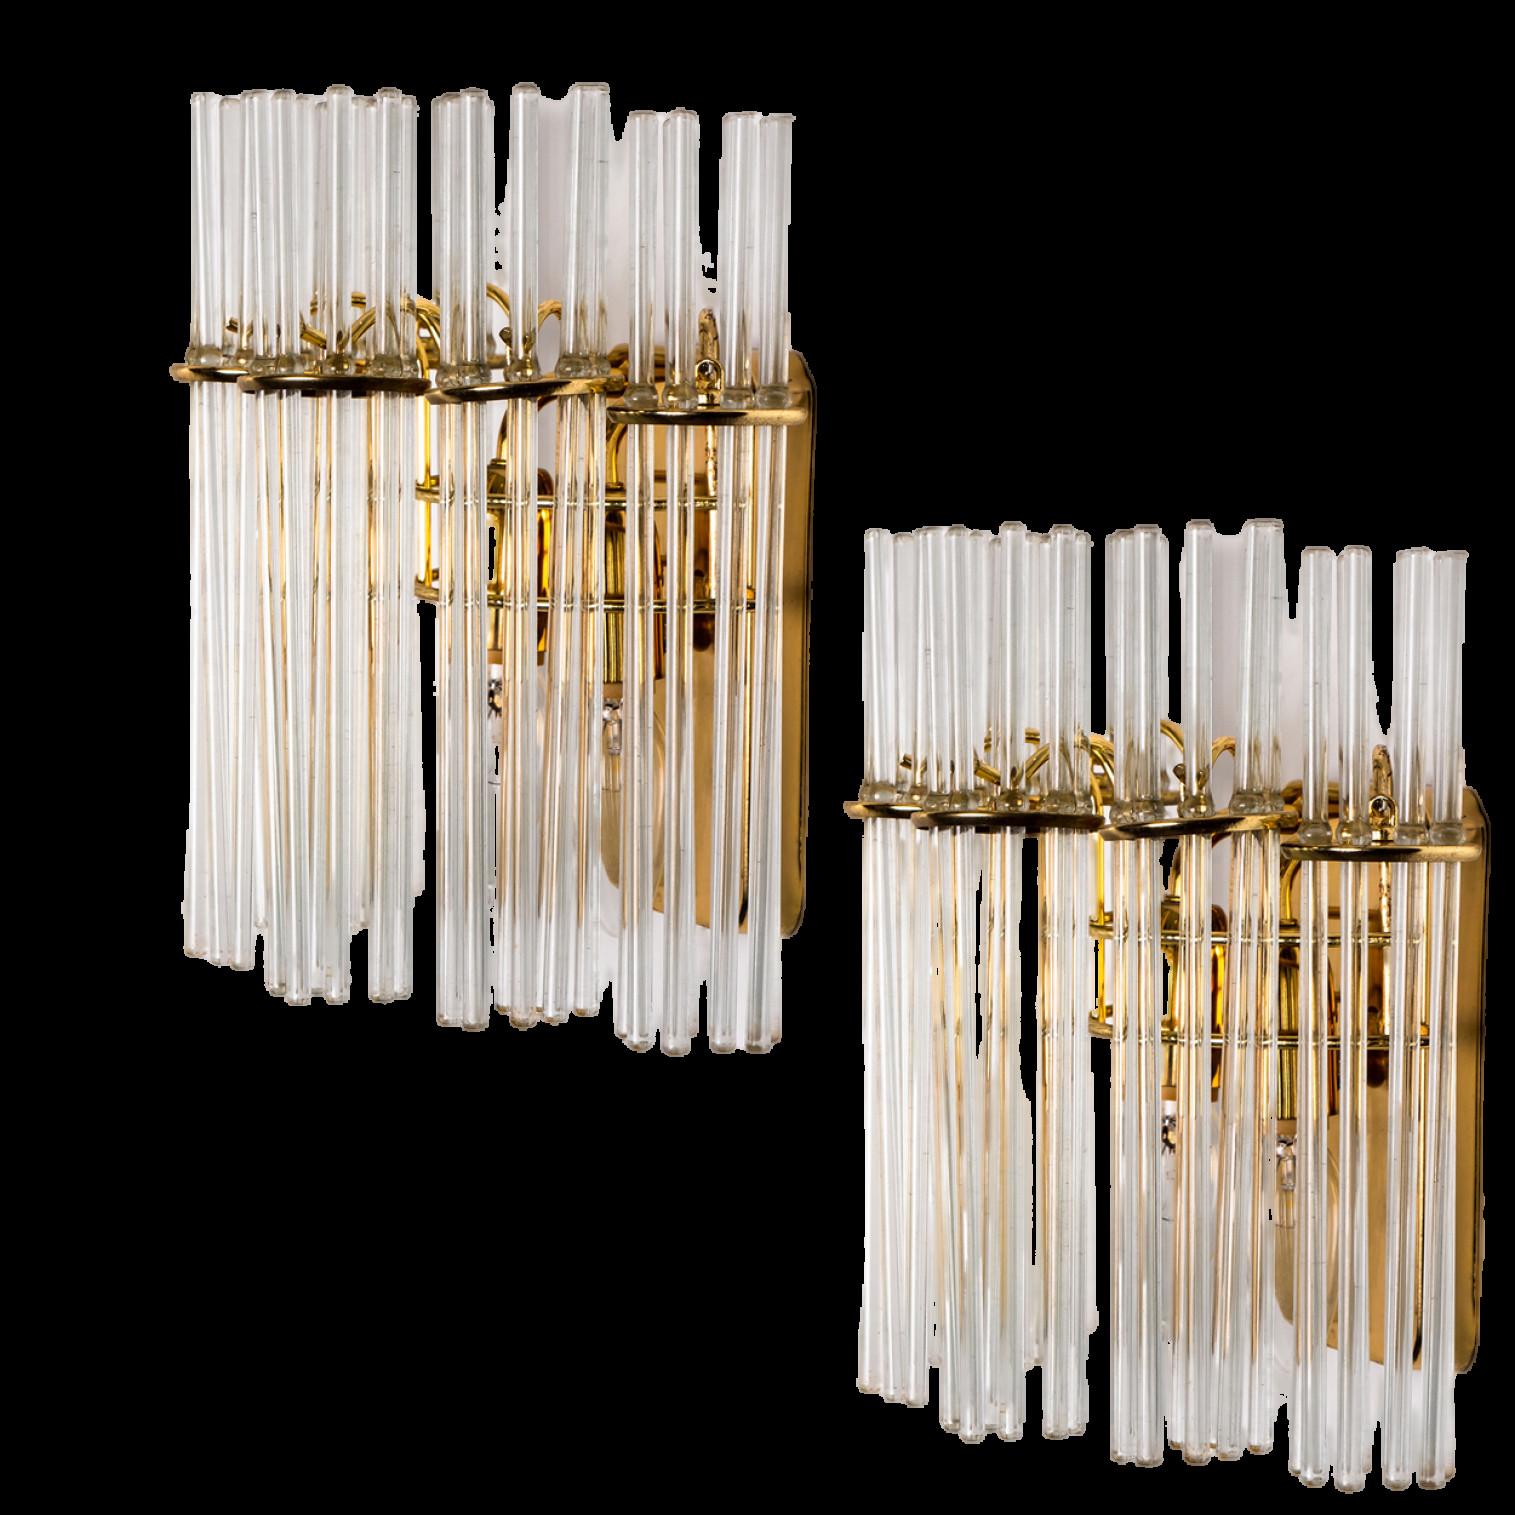 A wonderful pair of high-end wall sconces in the style of Sciolari. With long glass 'tubes' and brass details giving each piece an elegant appearance which refracts the light, filling a room with a soft, warm glow. The wall sconces have a brass back